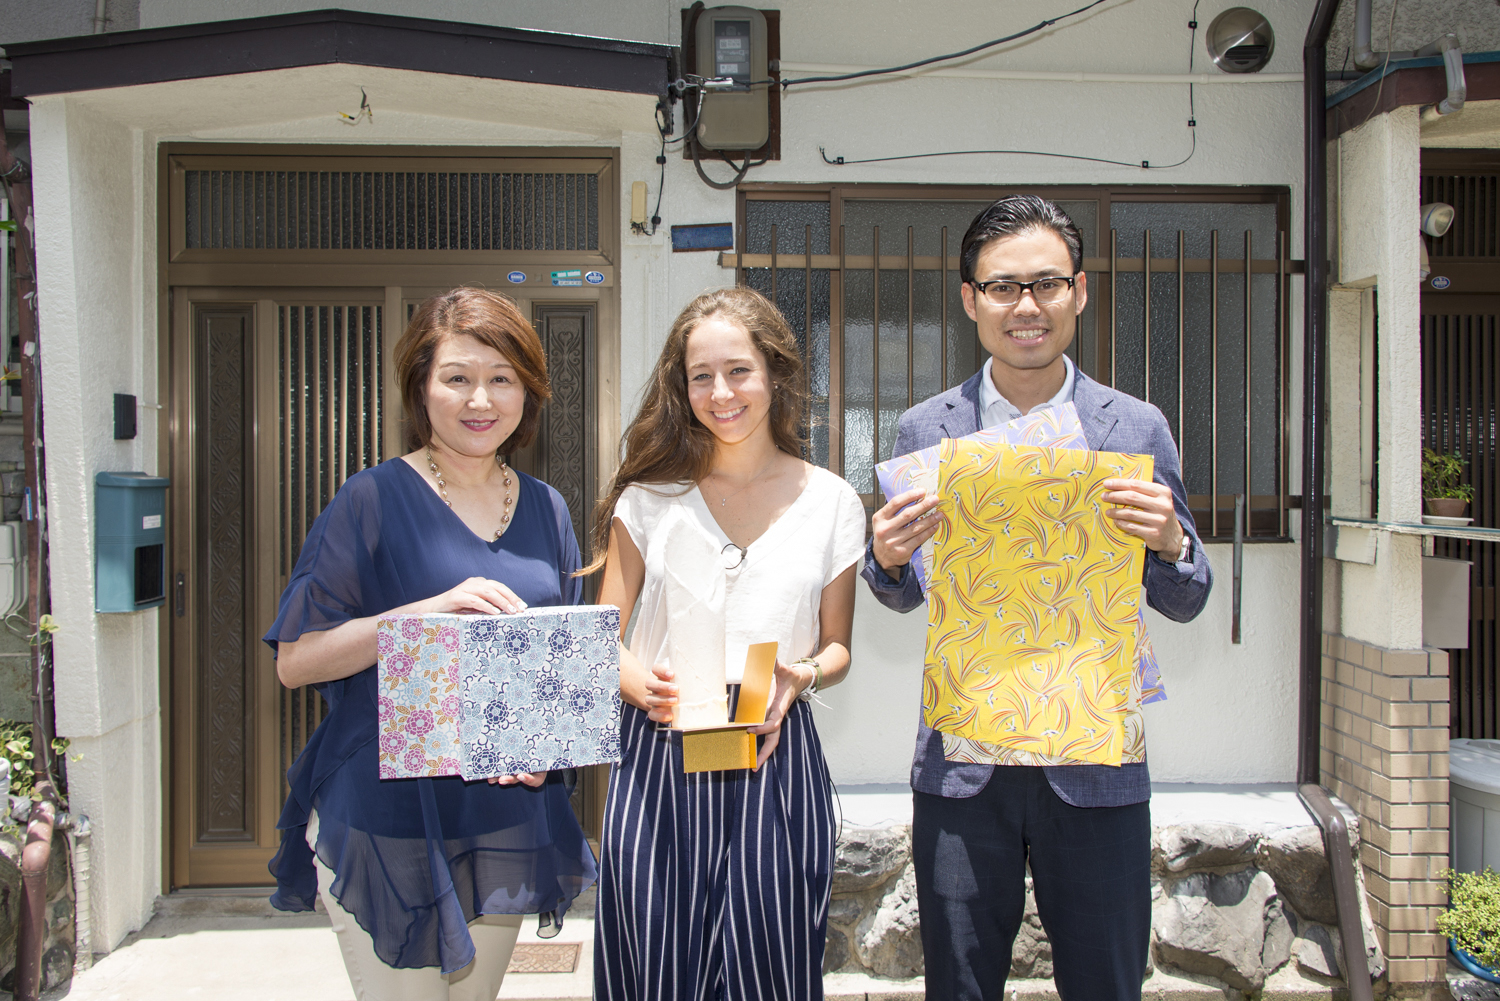 Hosts and Collaborate: Making Nagaya Tenement Modern with Washi Paper and NY